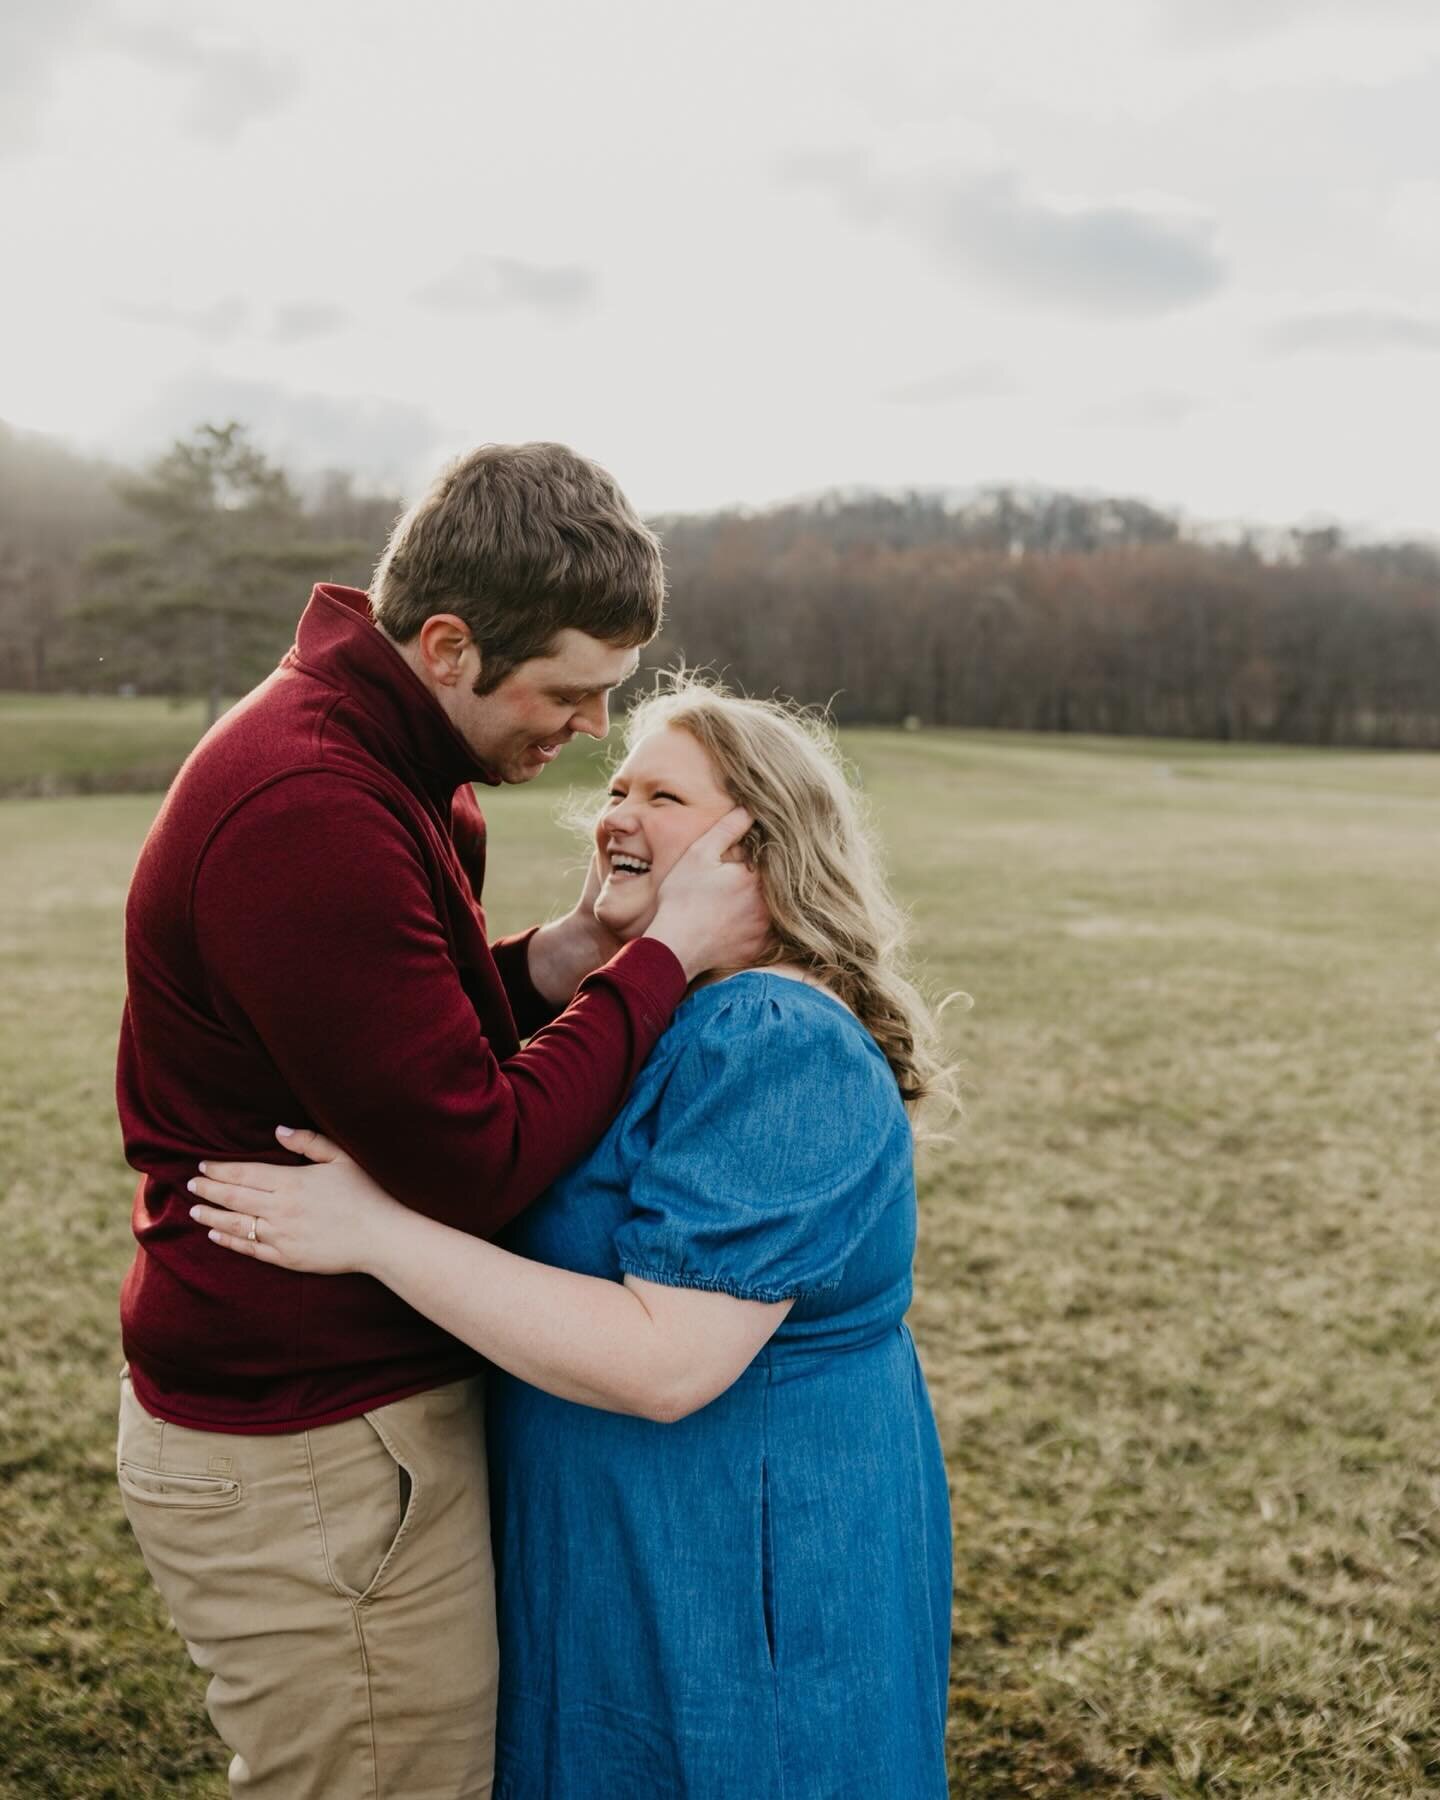 Meghan and Rob BRAVED the cold and we were rewarded with golden sun ☀️ Can&rsquo;t wait to get these two married!

#lizegbertphoto #portraitphotography #engaged #engagementphotos #weddingphotographer #piitsburghphotographer #beavercounty #brushcreekp